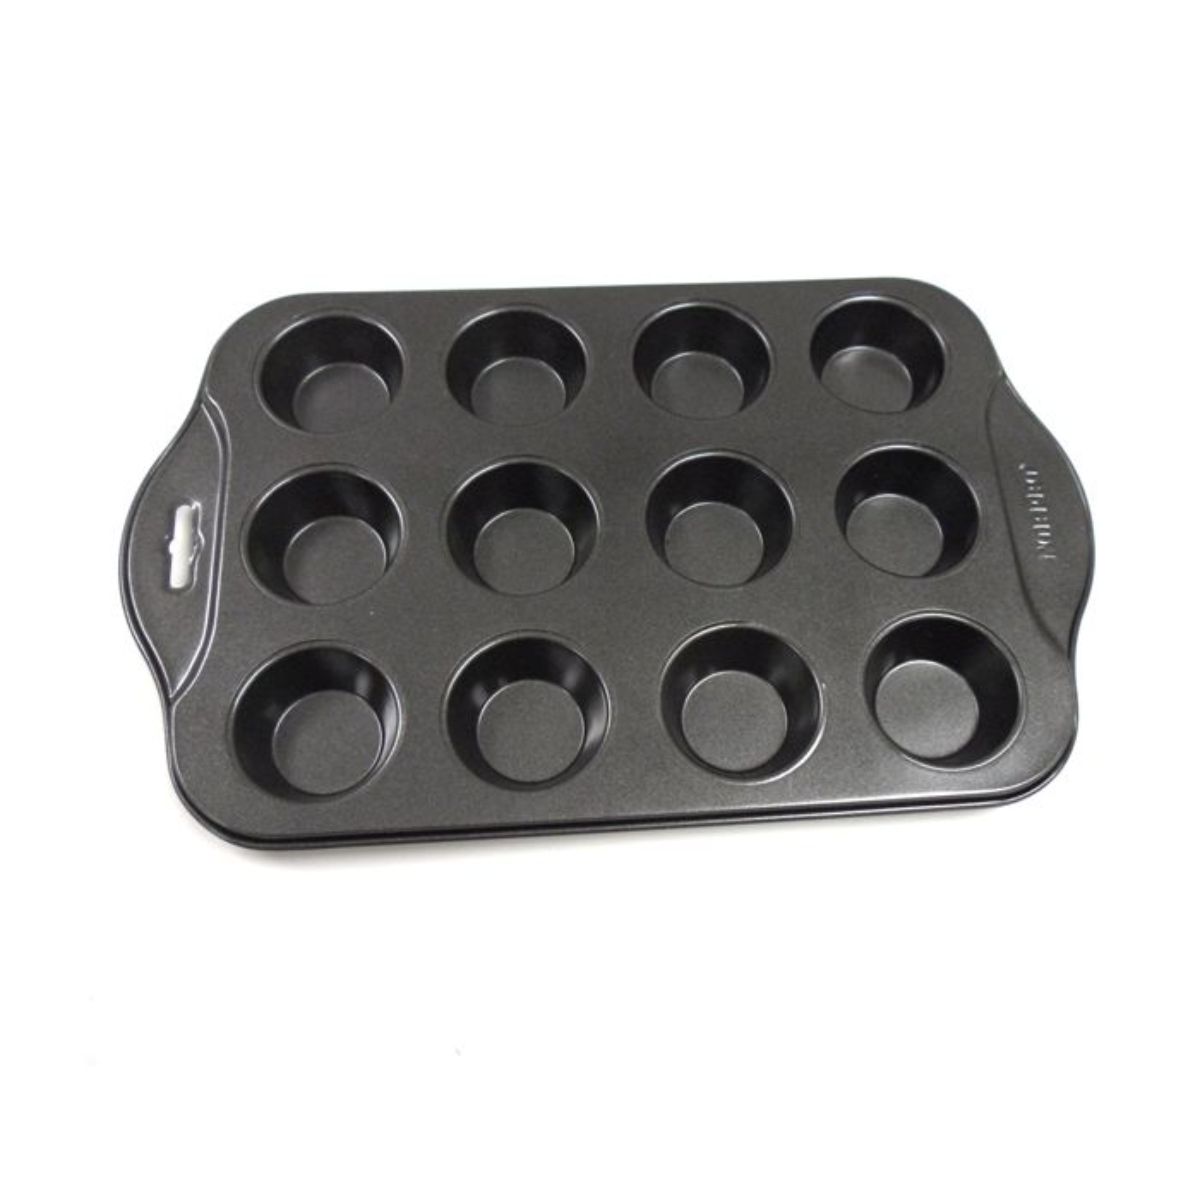 Norpro Giant Muffin Pan Non-Stick